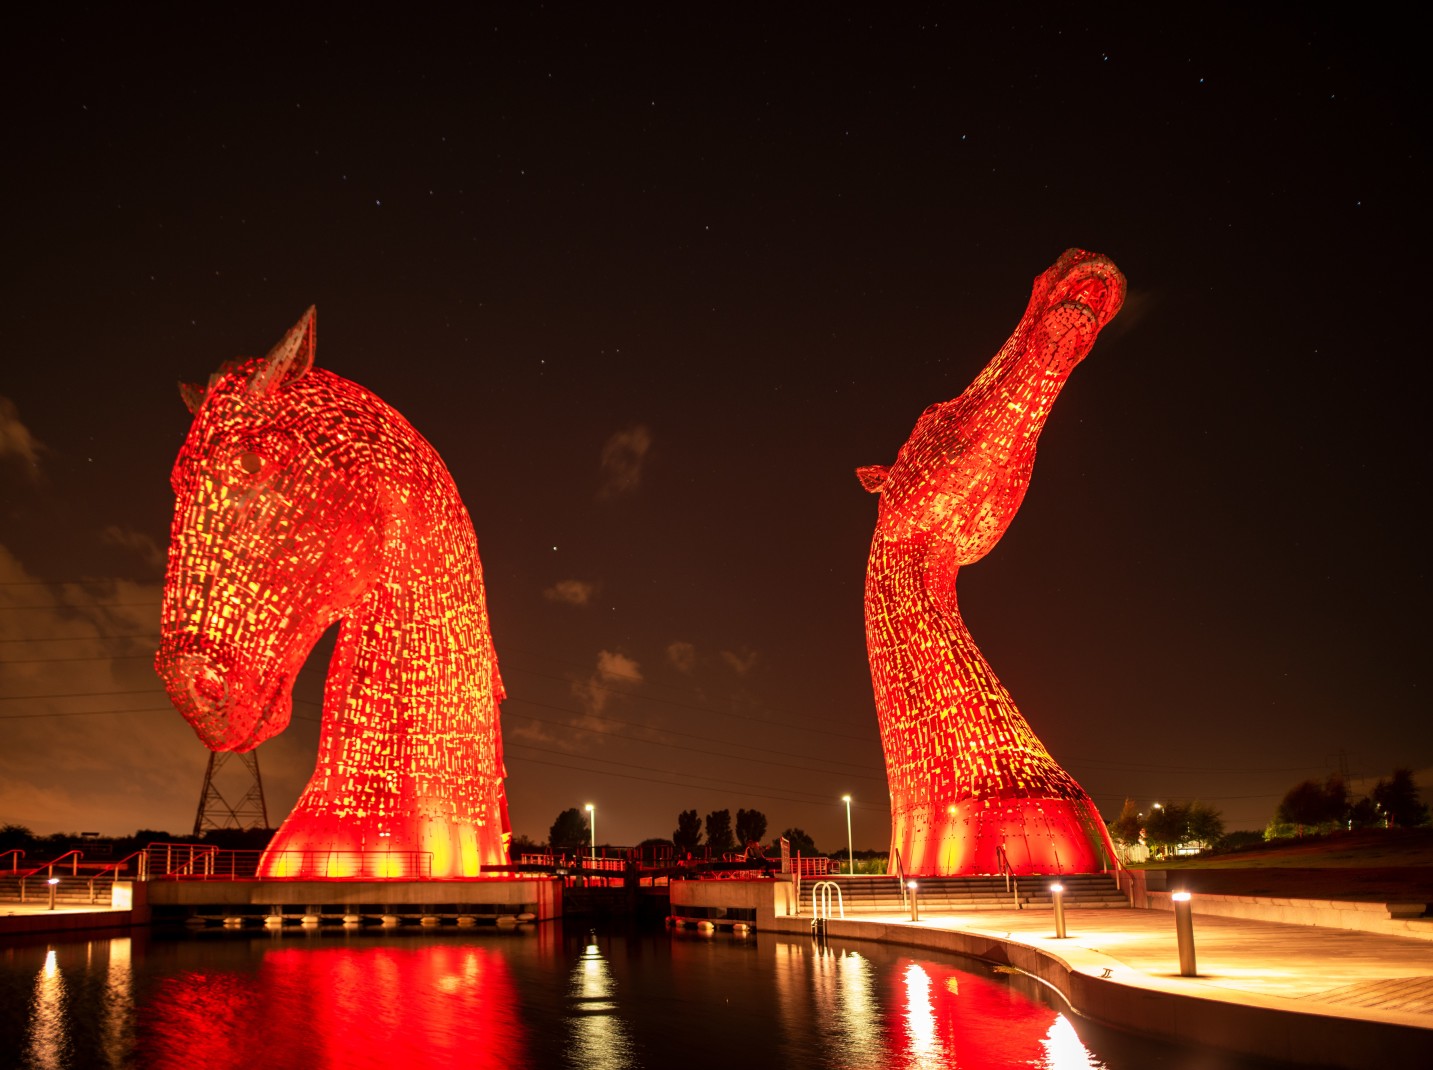 The Kelpies sculpture in Helix Parkland located between Falkirk and Grangemouth, UK